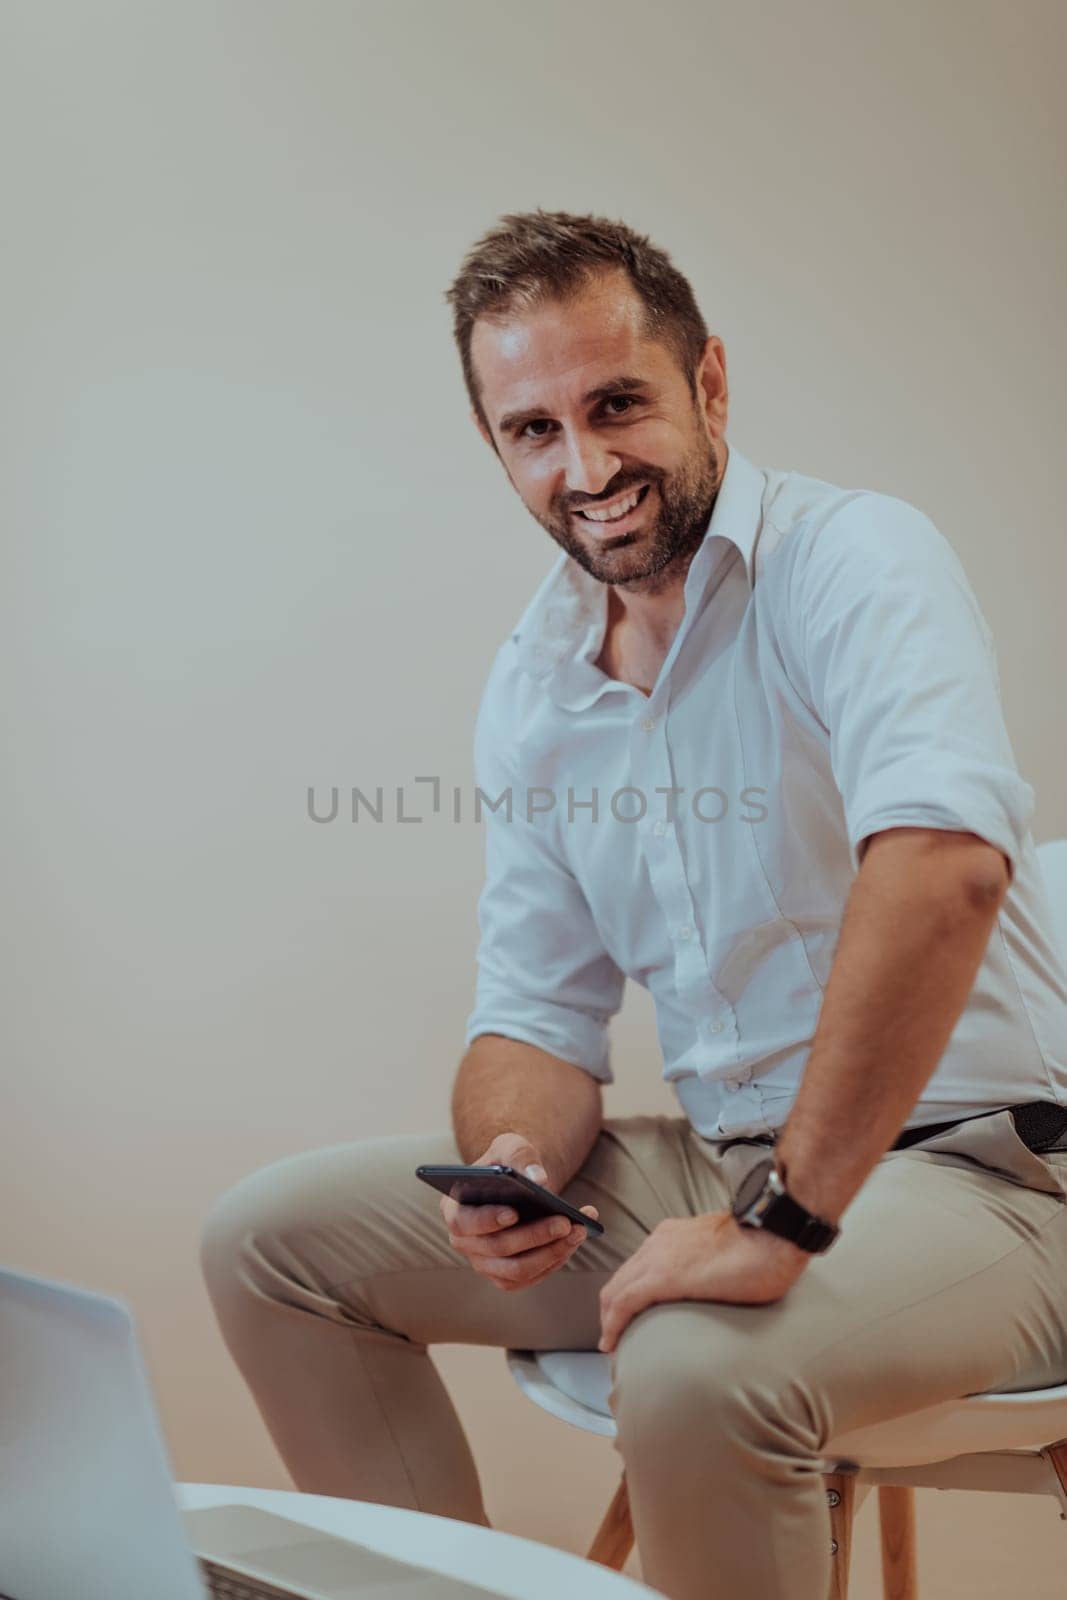 A confident businessman sitting and using laptop and smartphone with a determined expression, while a beige background enhances the professional atmosphere, showcasing his productivity and expertise